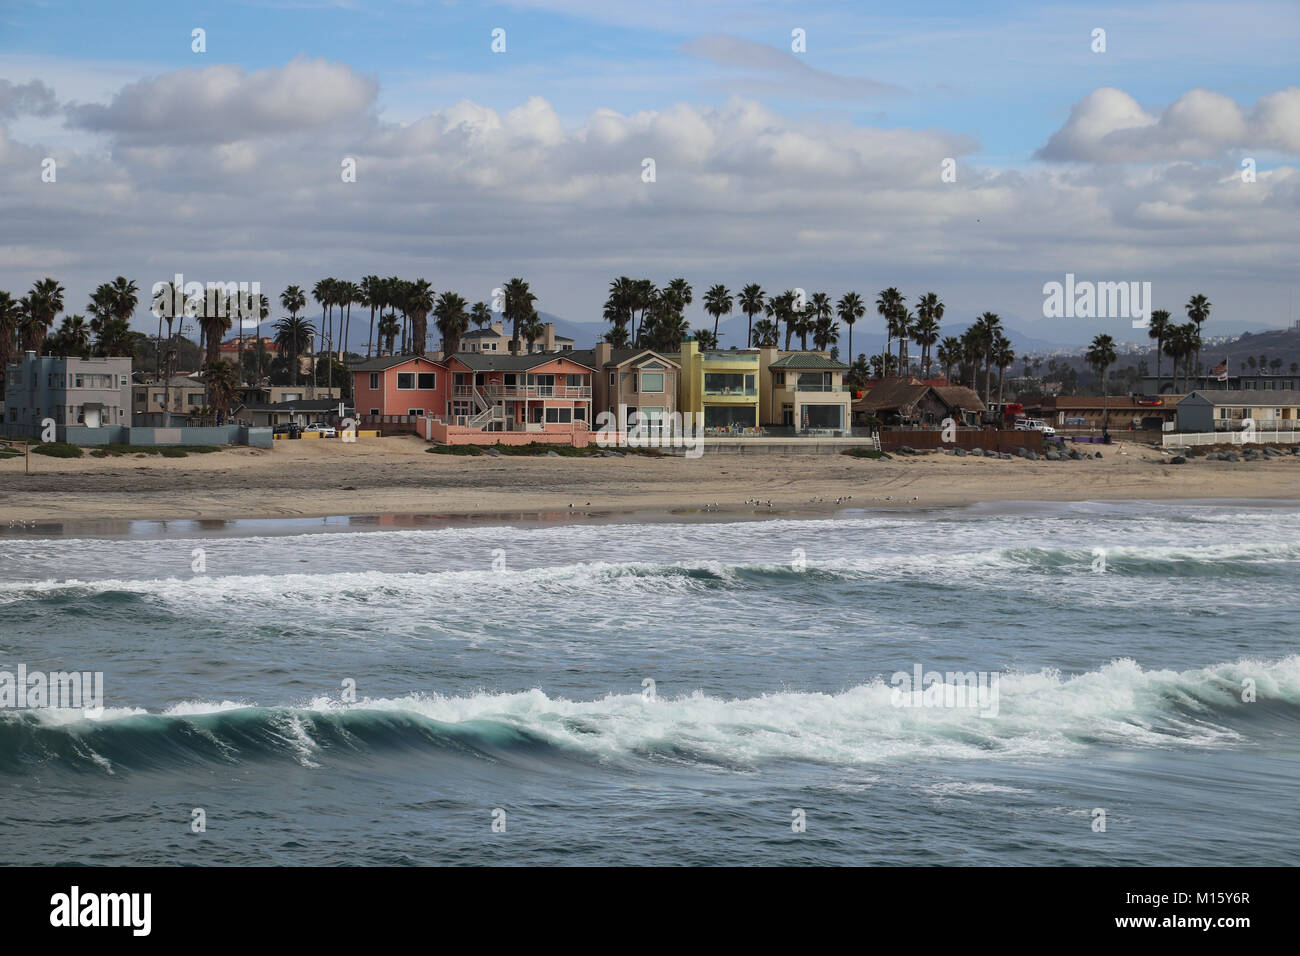 Multicolored beach cottages line the shore at Imperial Beach, California, as seen from the pier.Sets of waves are breaking on the beach, clouds in sky Stock Photo